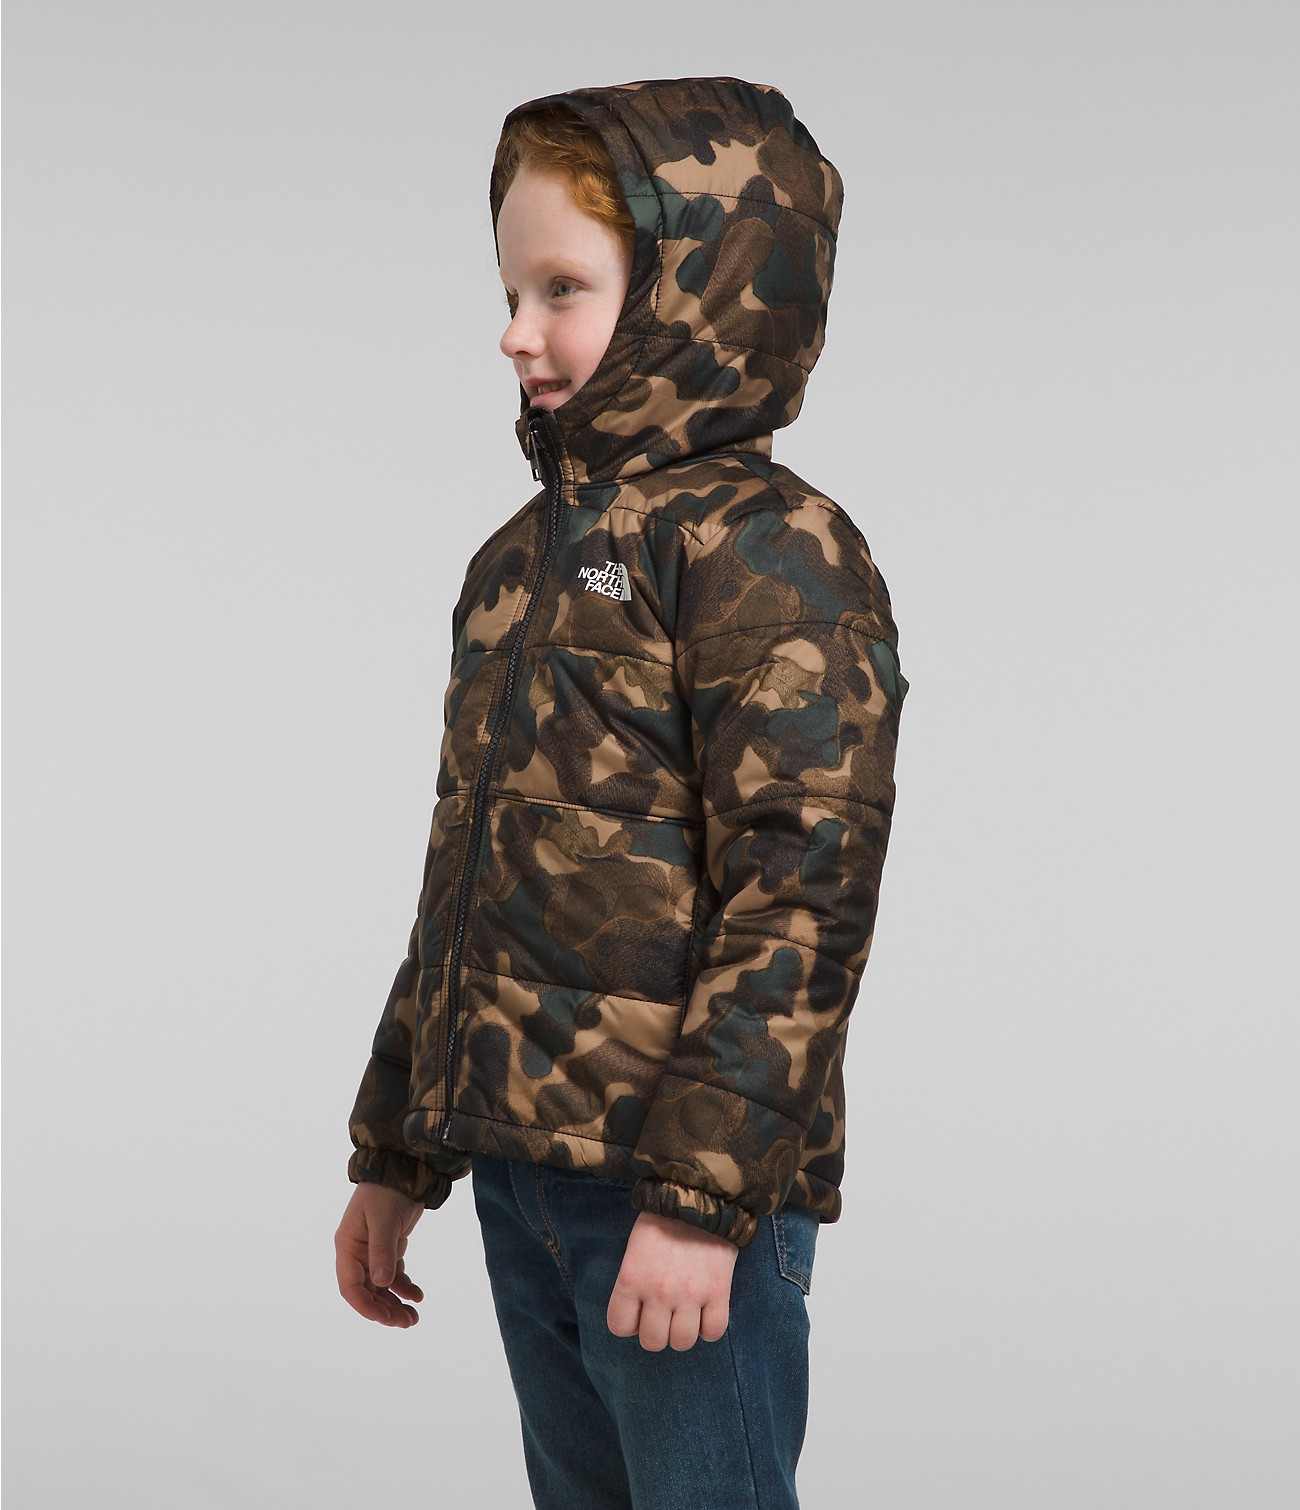 Kids’ Reversible Mt Chimbo Full-Zip Hooded Jacket | The North Face